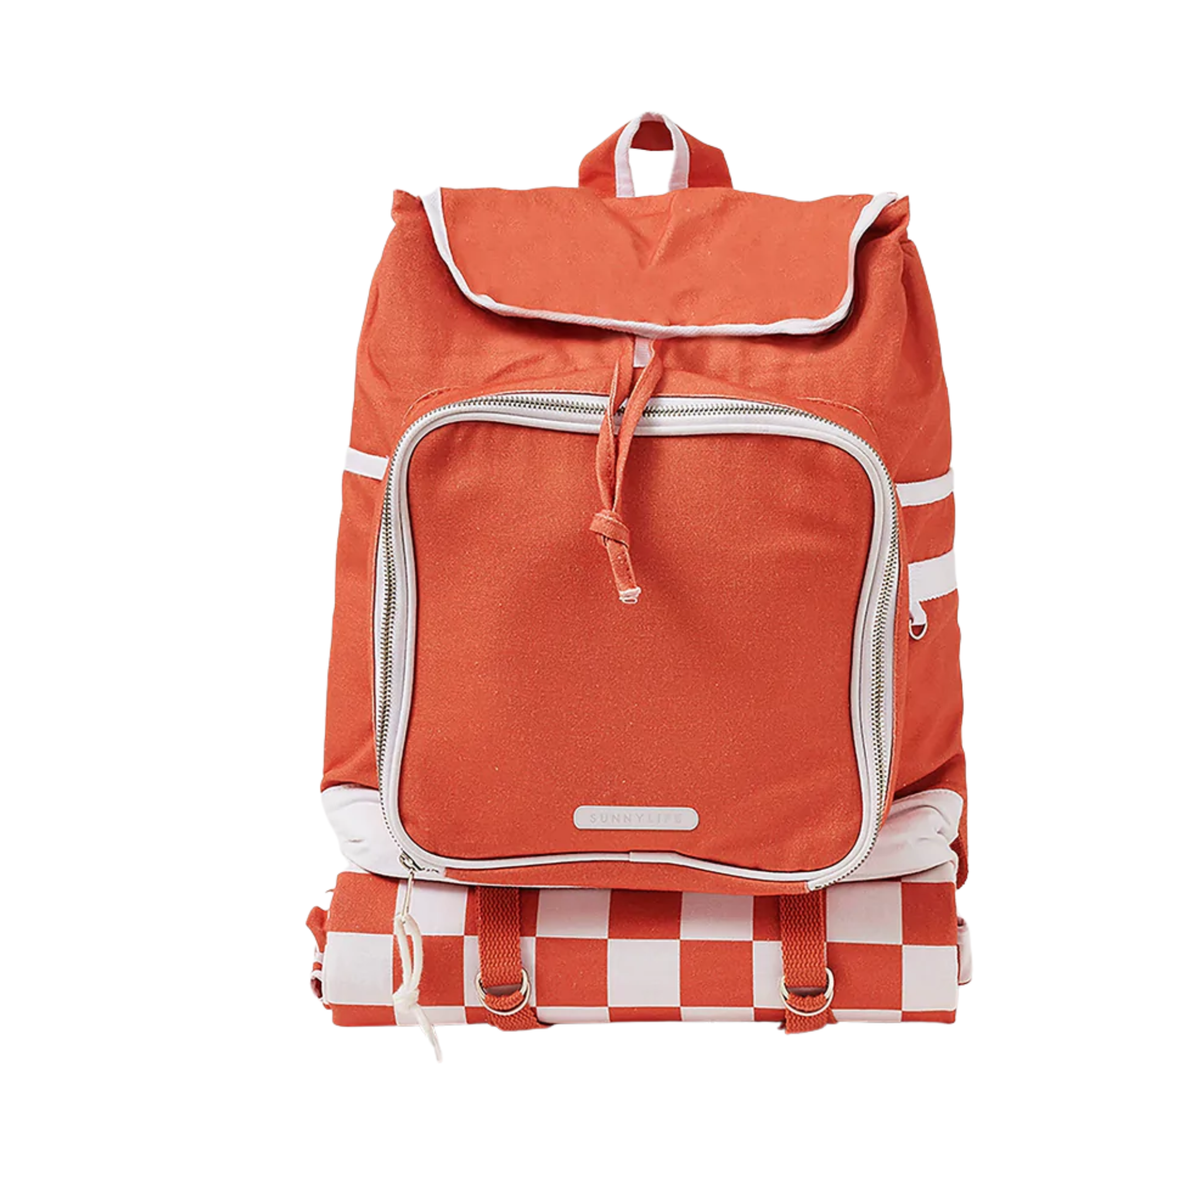 LUXE PICNIC BACKPACK - TERRACOTTA